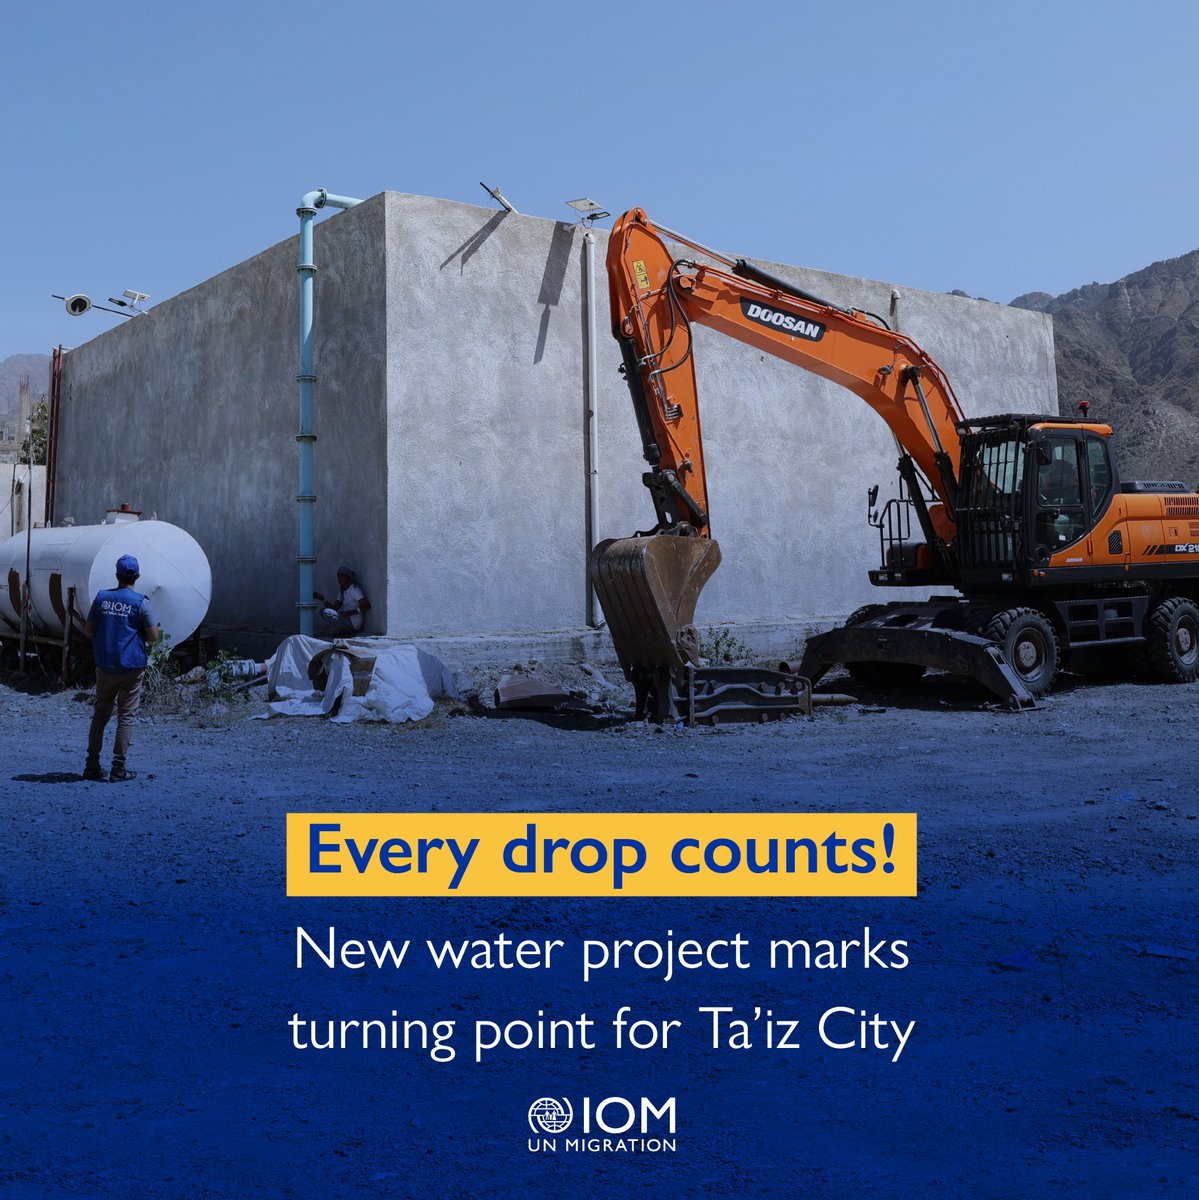 “We aim to create lasting impact, ensuring access to clean water through the use of solar energy to pump water.” said Matt Huber, IOM’s Acting CoM in Yemen.

Learn how a new IOM & @KfW_int project addresses water needs for 60,000+ people in Ta'iz.

tinyurl.com/ytxnzfsw